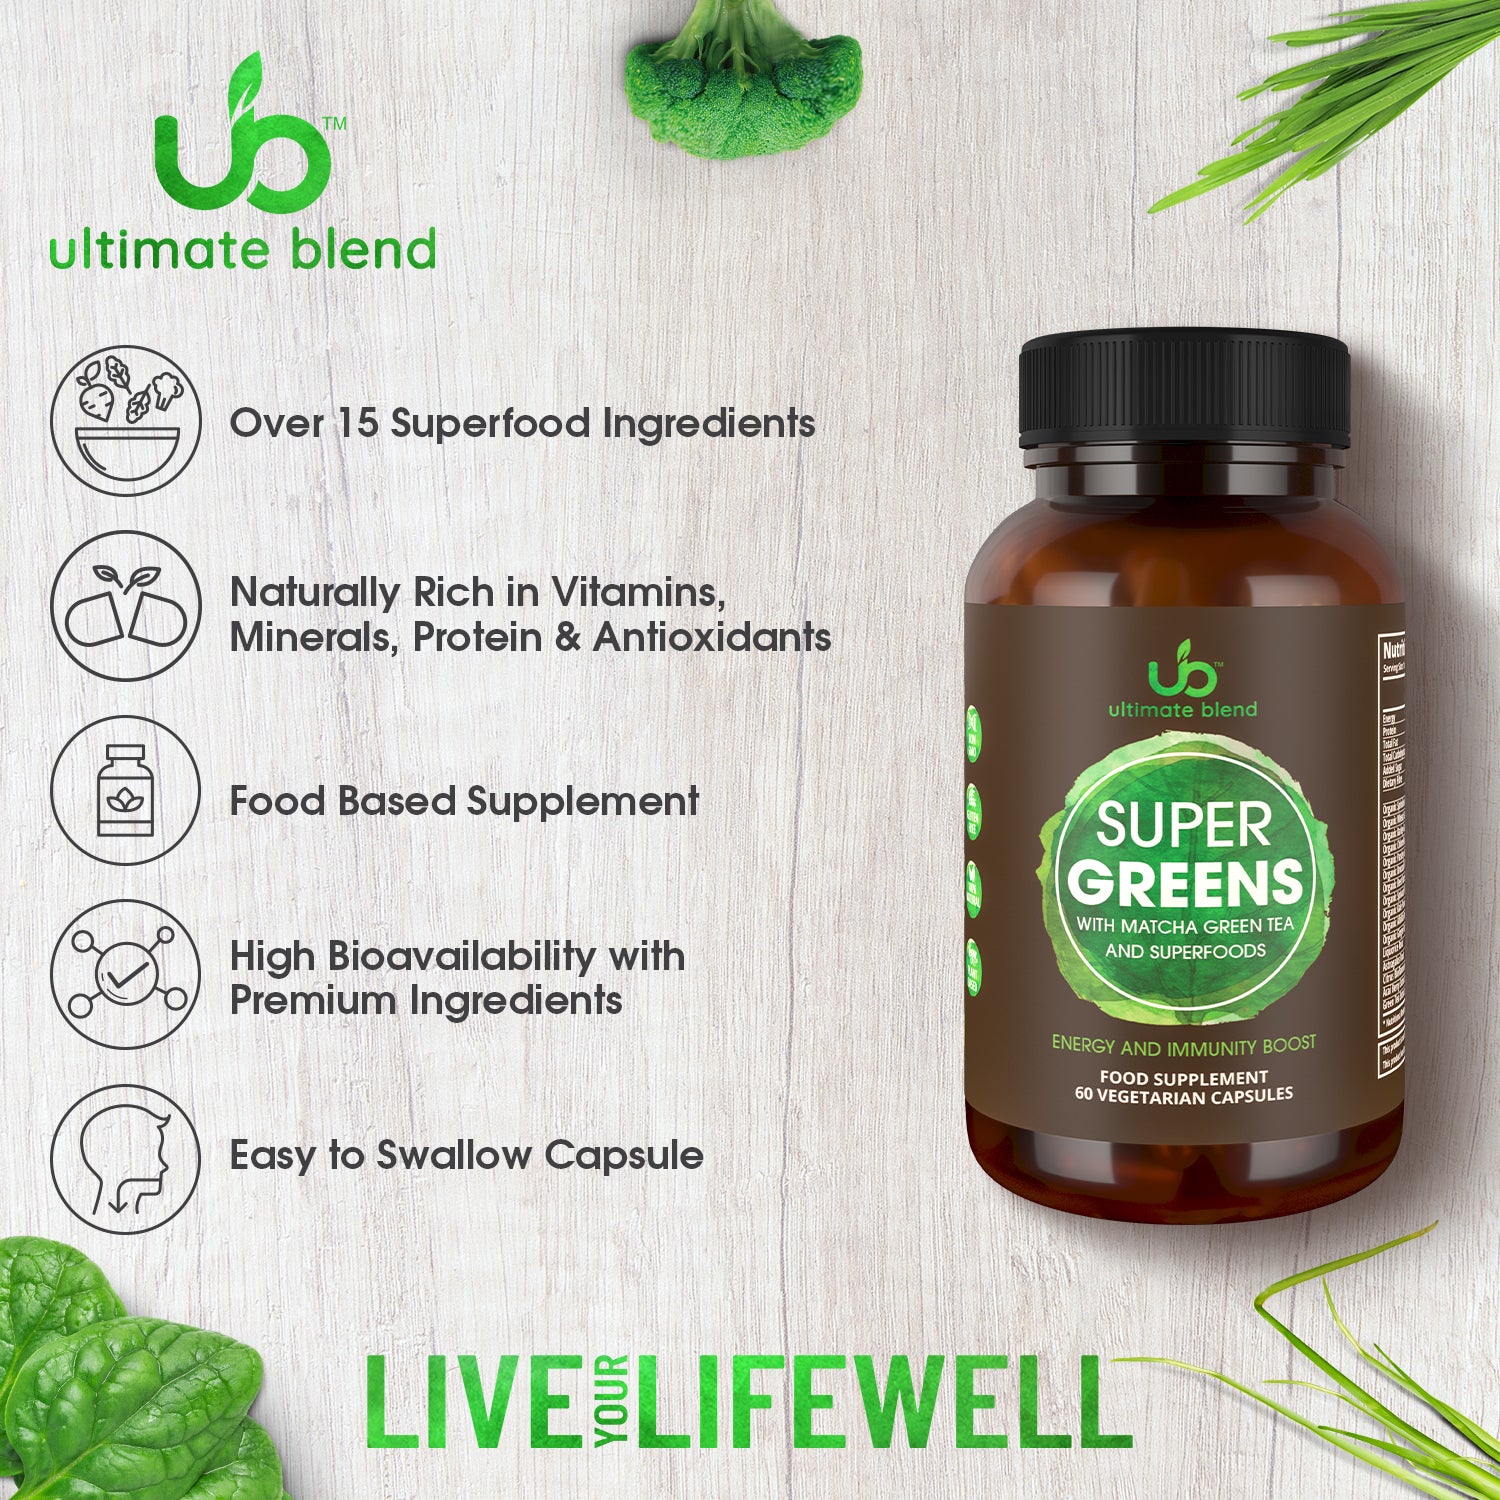 Super Greens with Matcha Green Tea and Superfoods